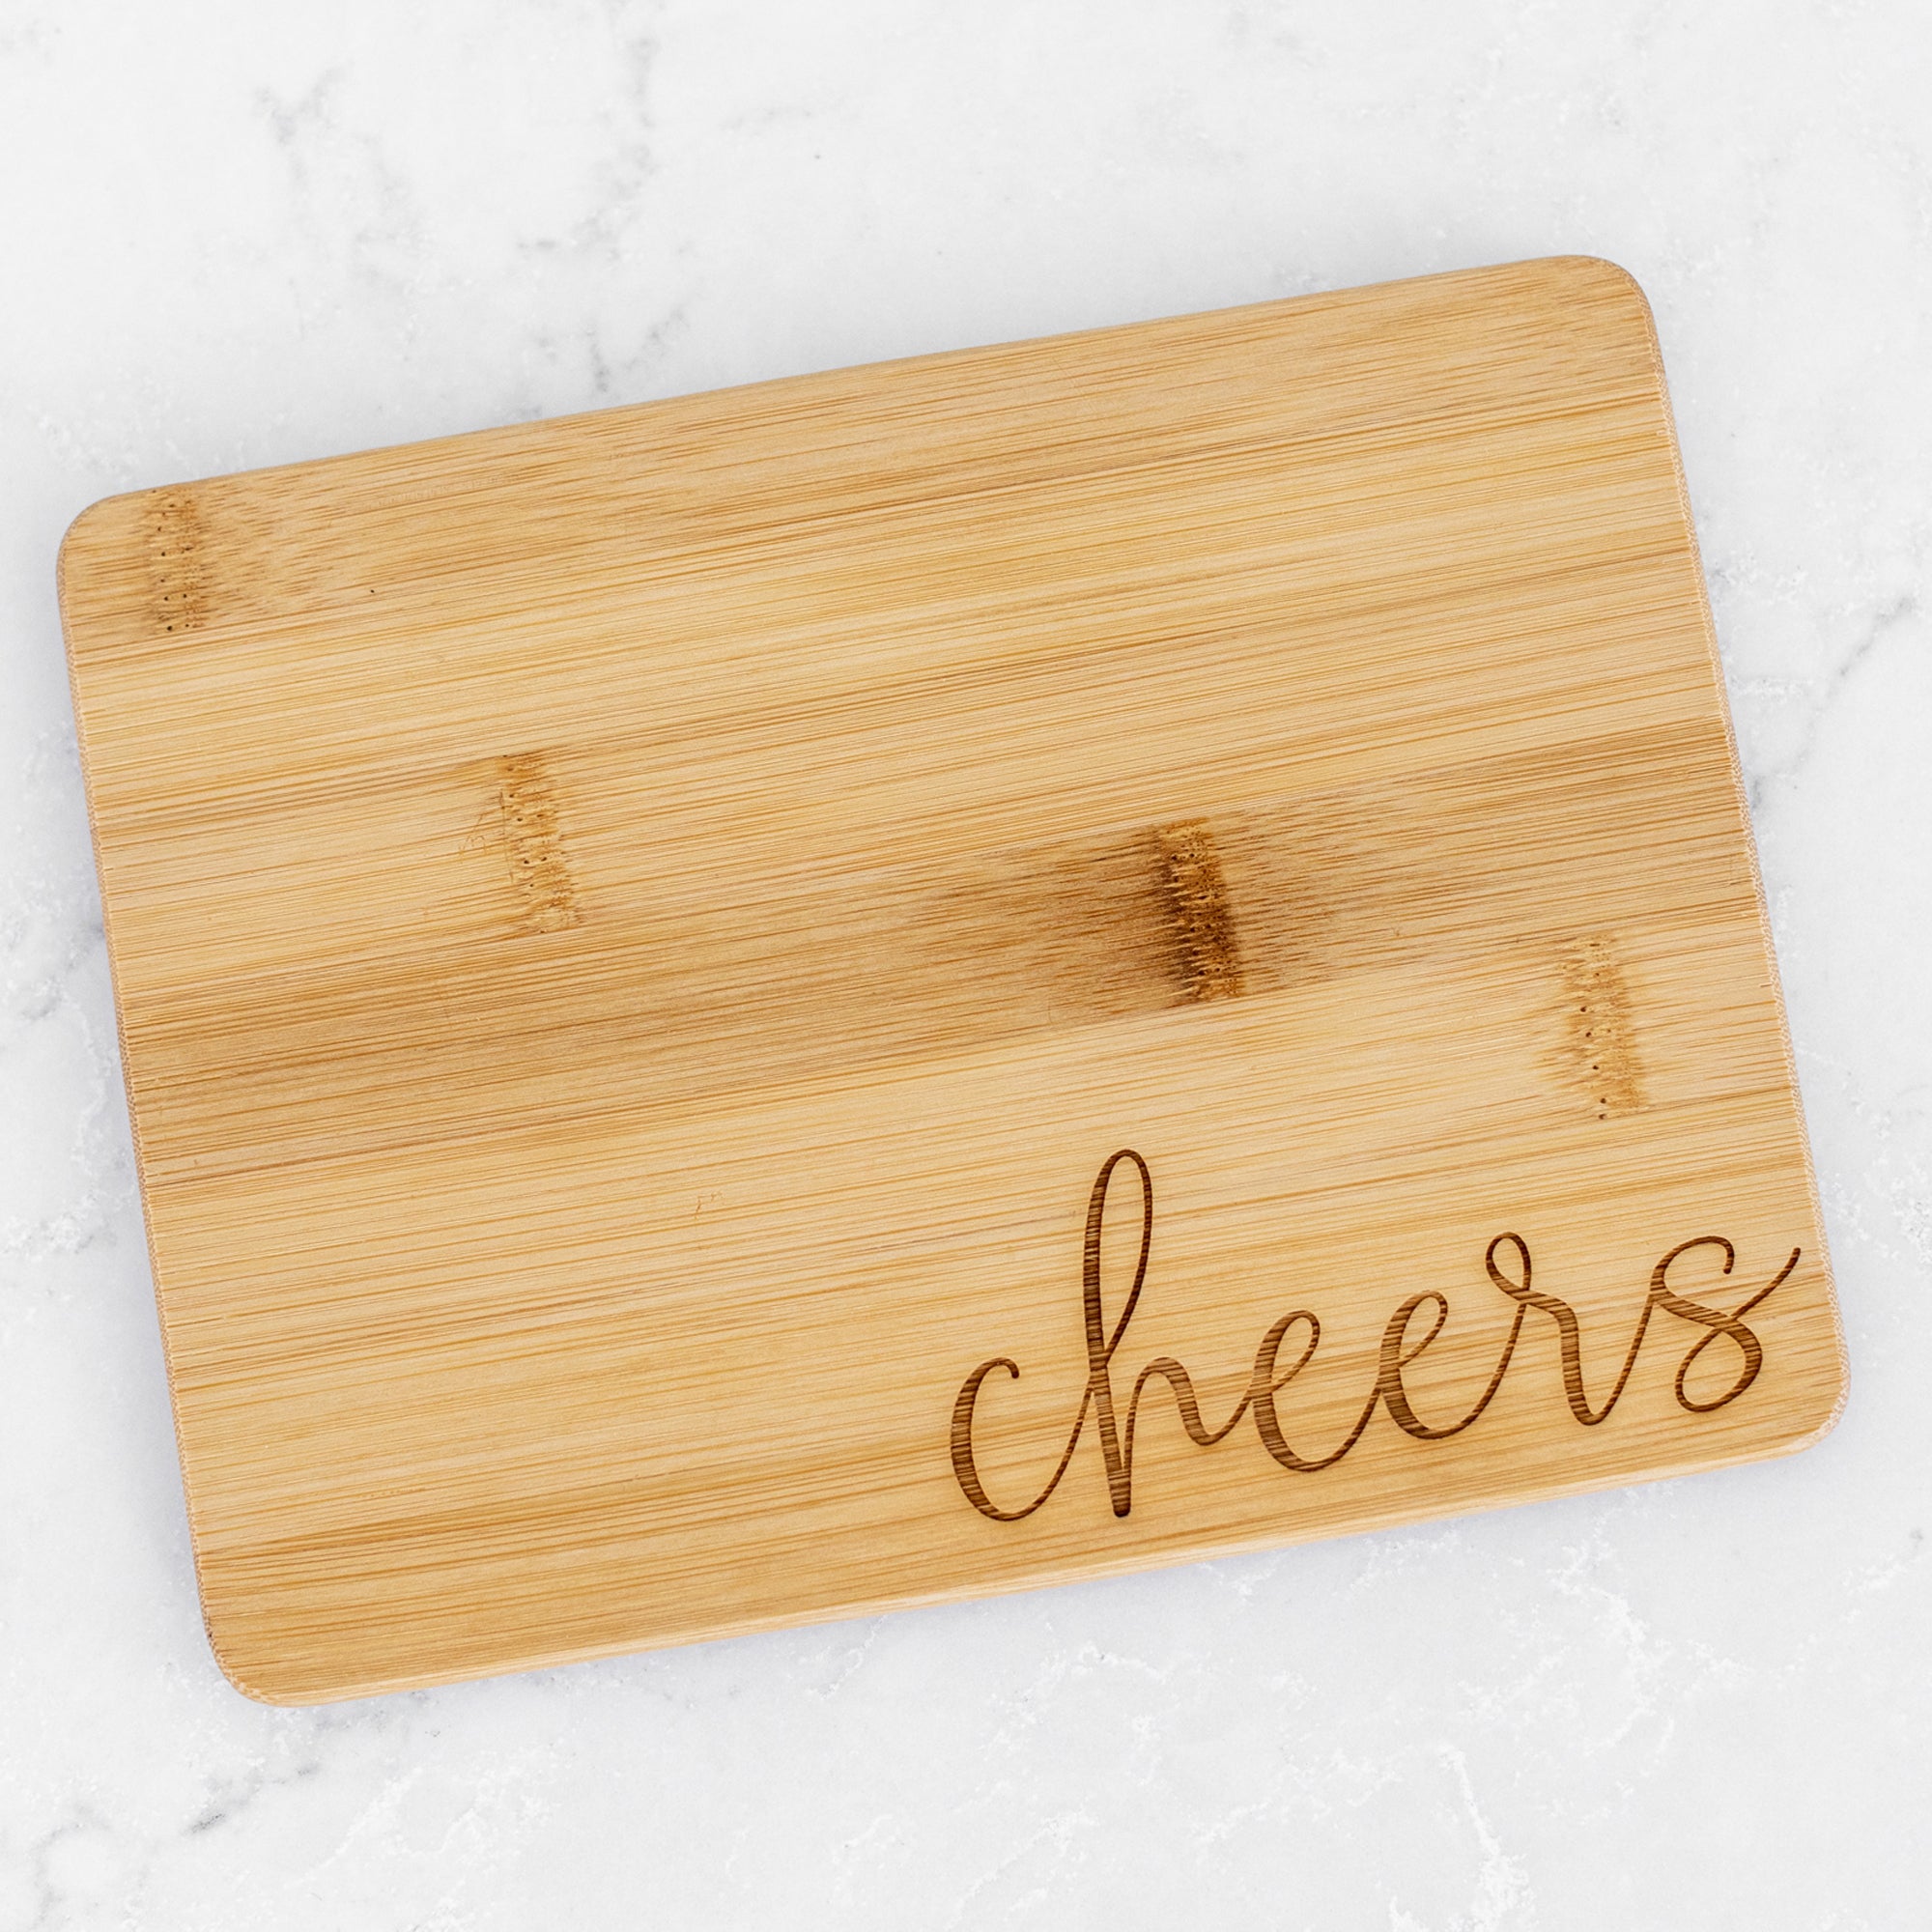 Time to Celebrate - Deluxe “Cheers” Bar Gift Set